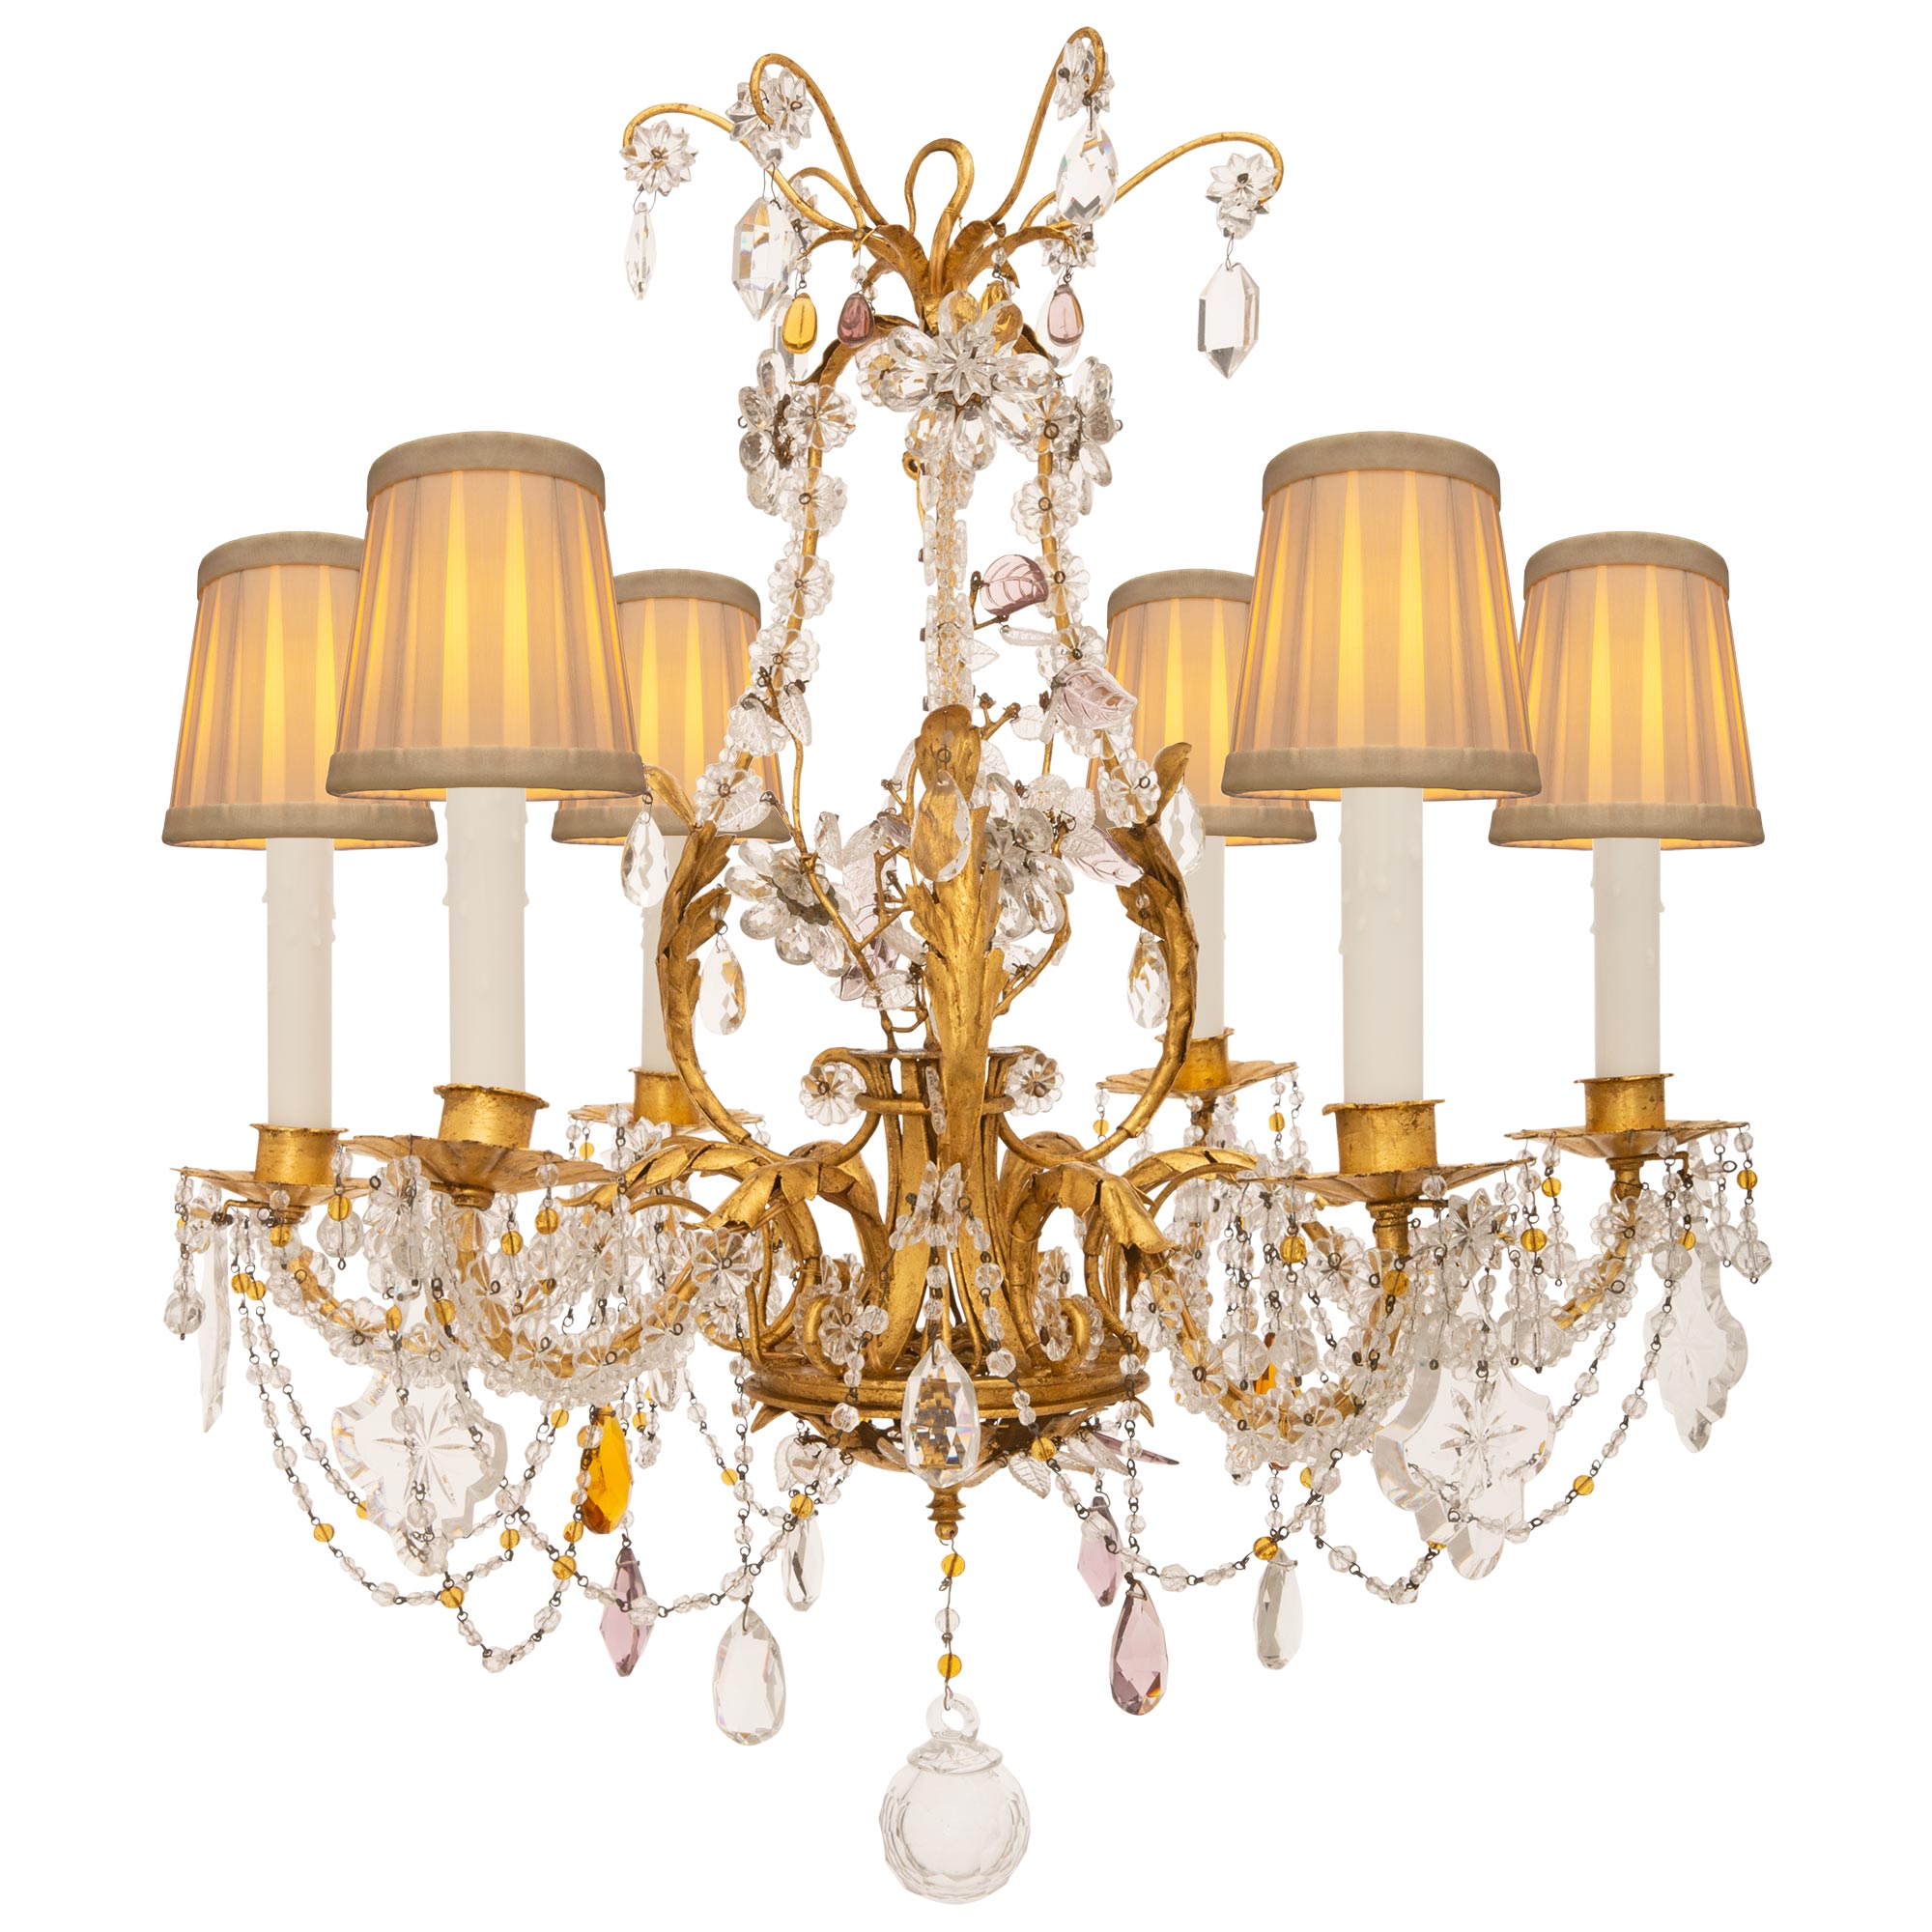 French Turn Of The Century Louis XV St. Gilt Metal & Baccarat Crystal Chandelier